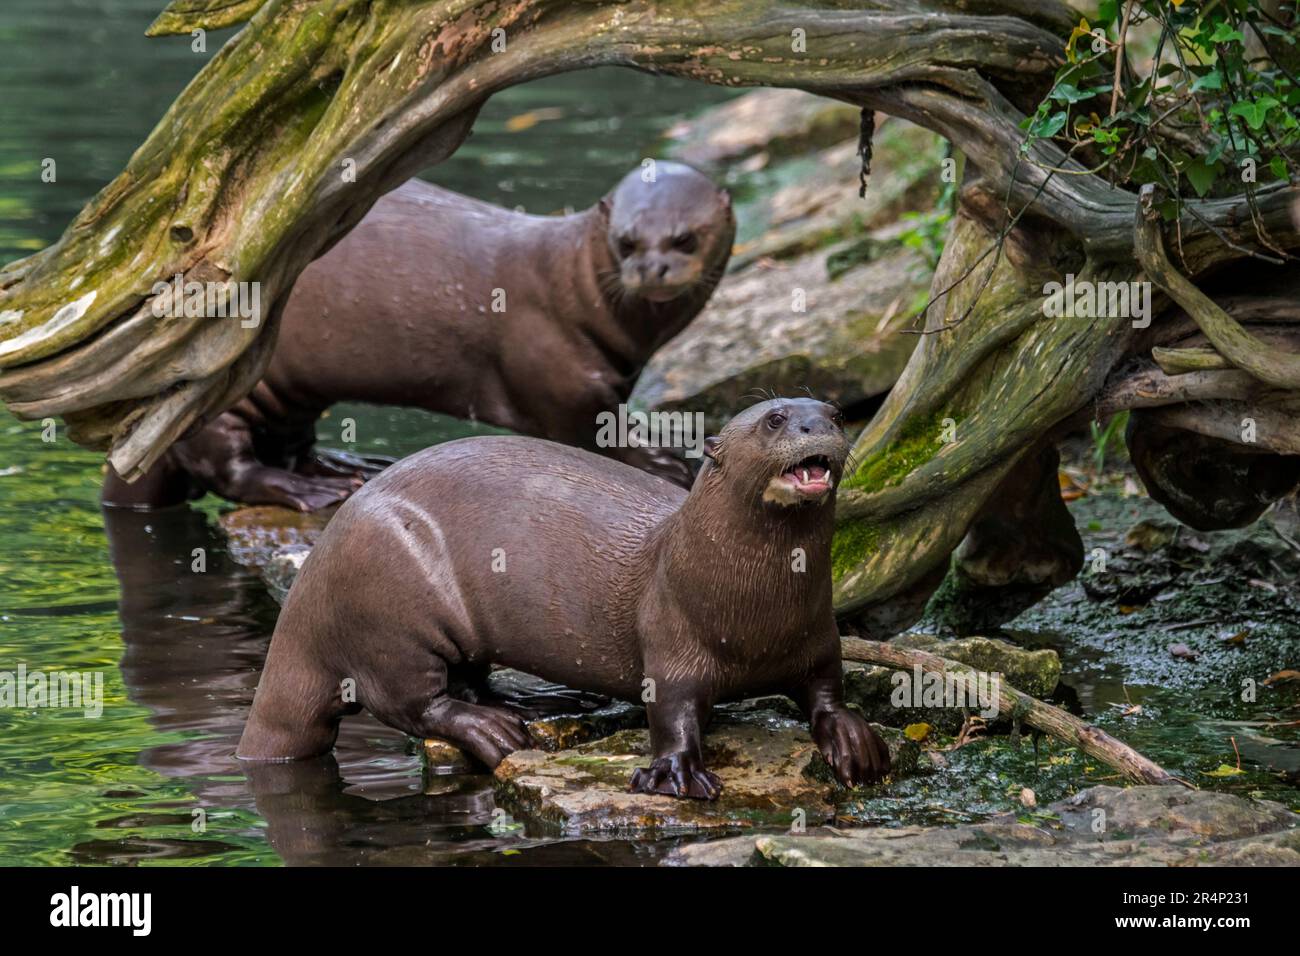 Two giant otters / giant river otter pair (Pteronura brasiliensis) native along the Amazon River in South America Stock Photo